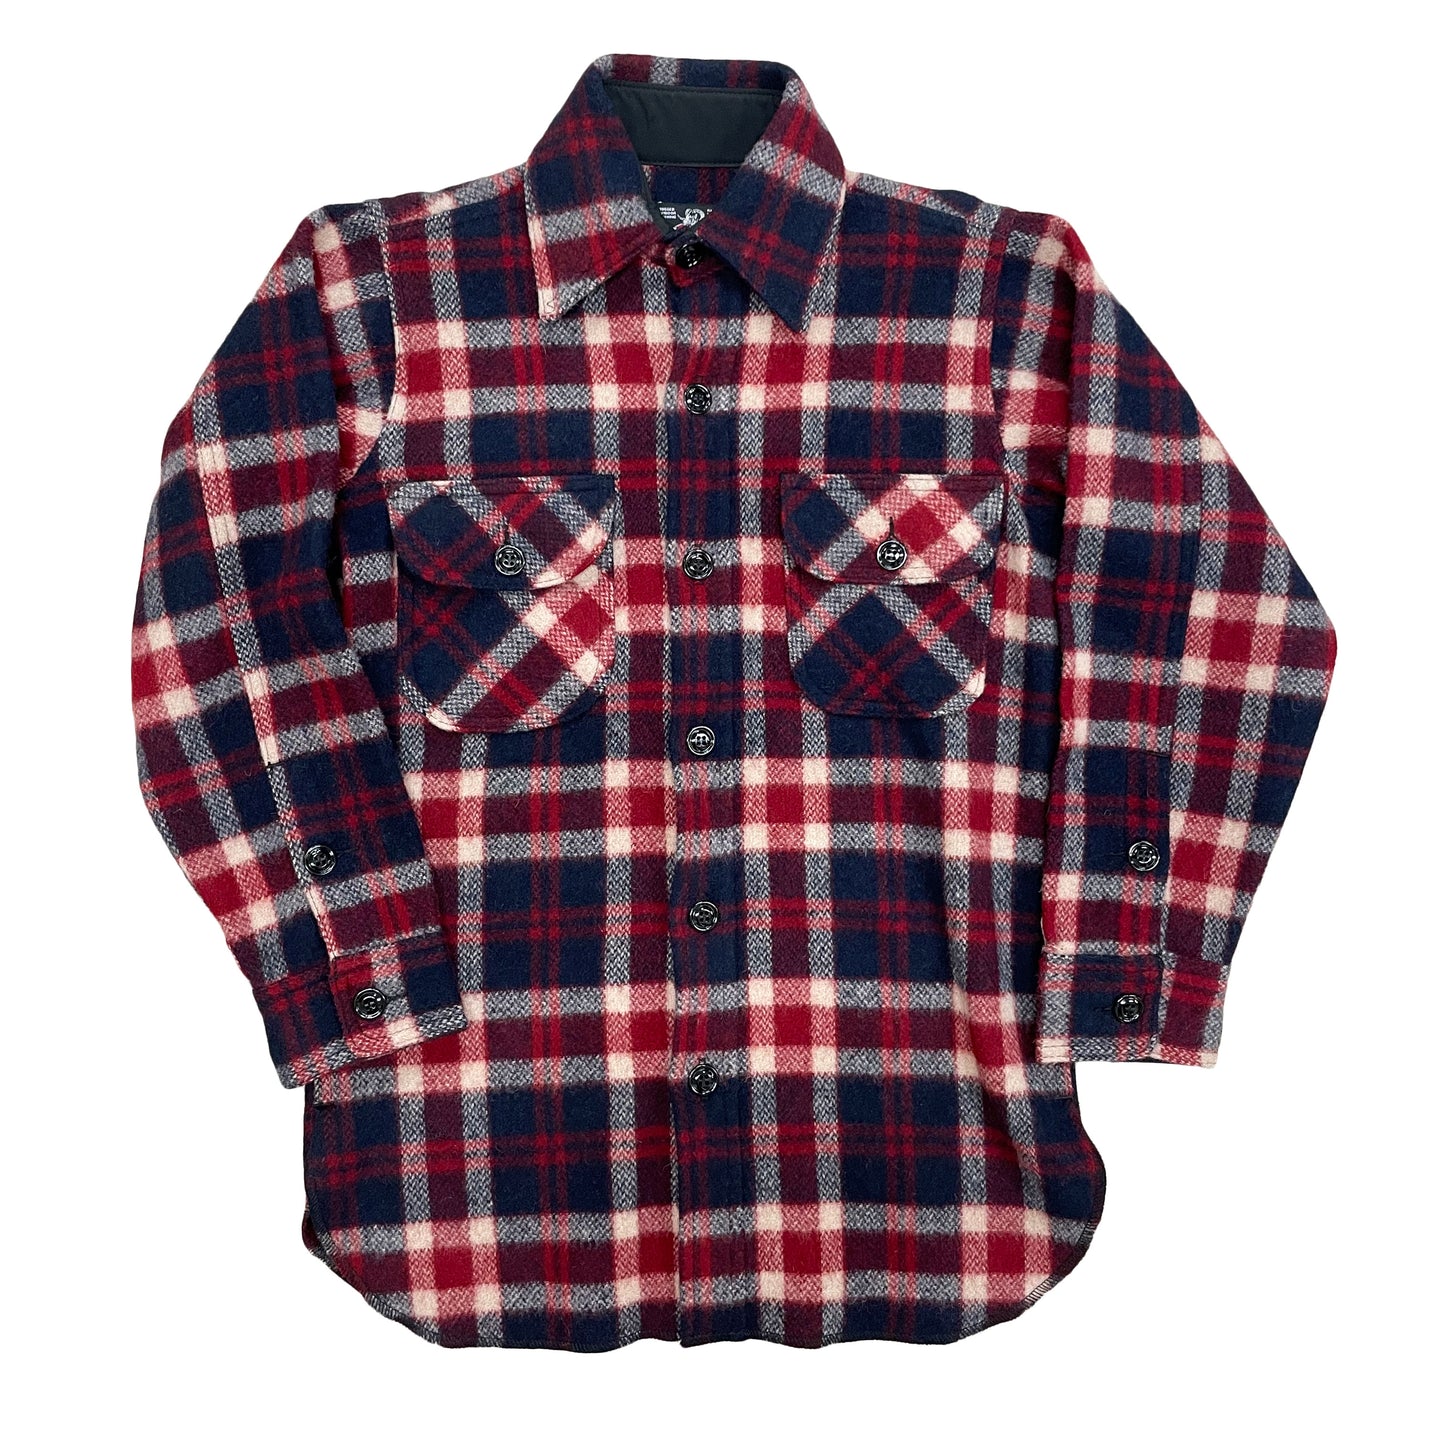 Long Tail Button Down long sleeve wool shirt with a 6 button front, button cuffs and two front chest pockets. Shown in red, white and blue plaid.